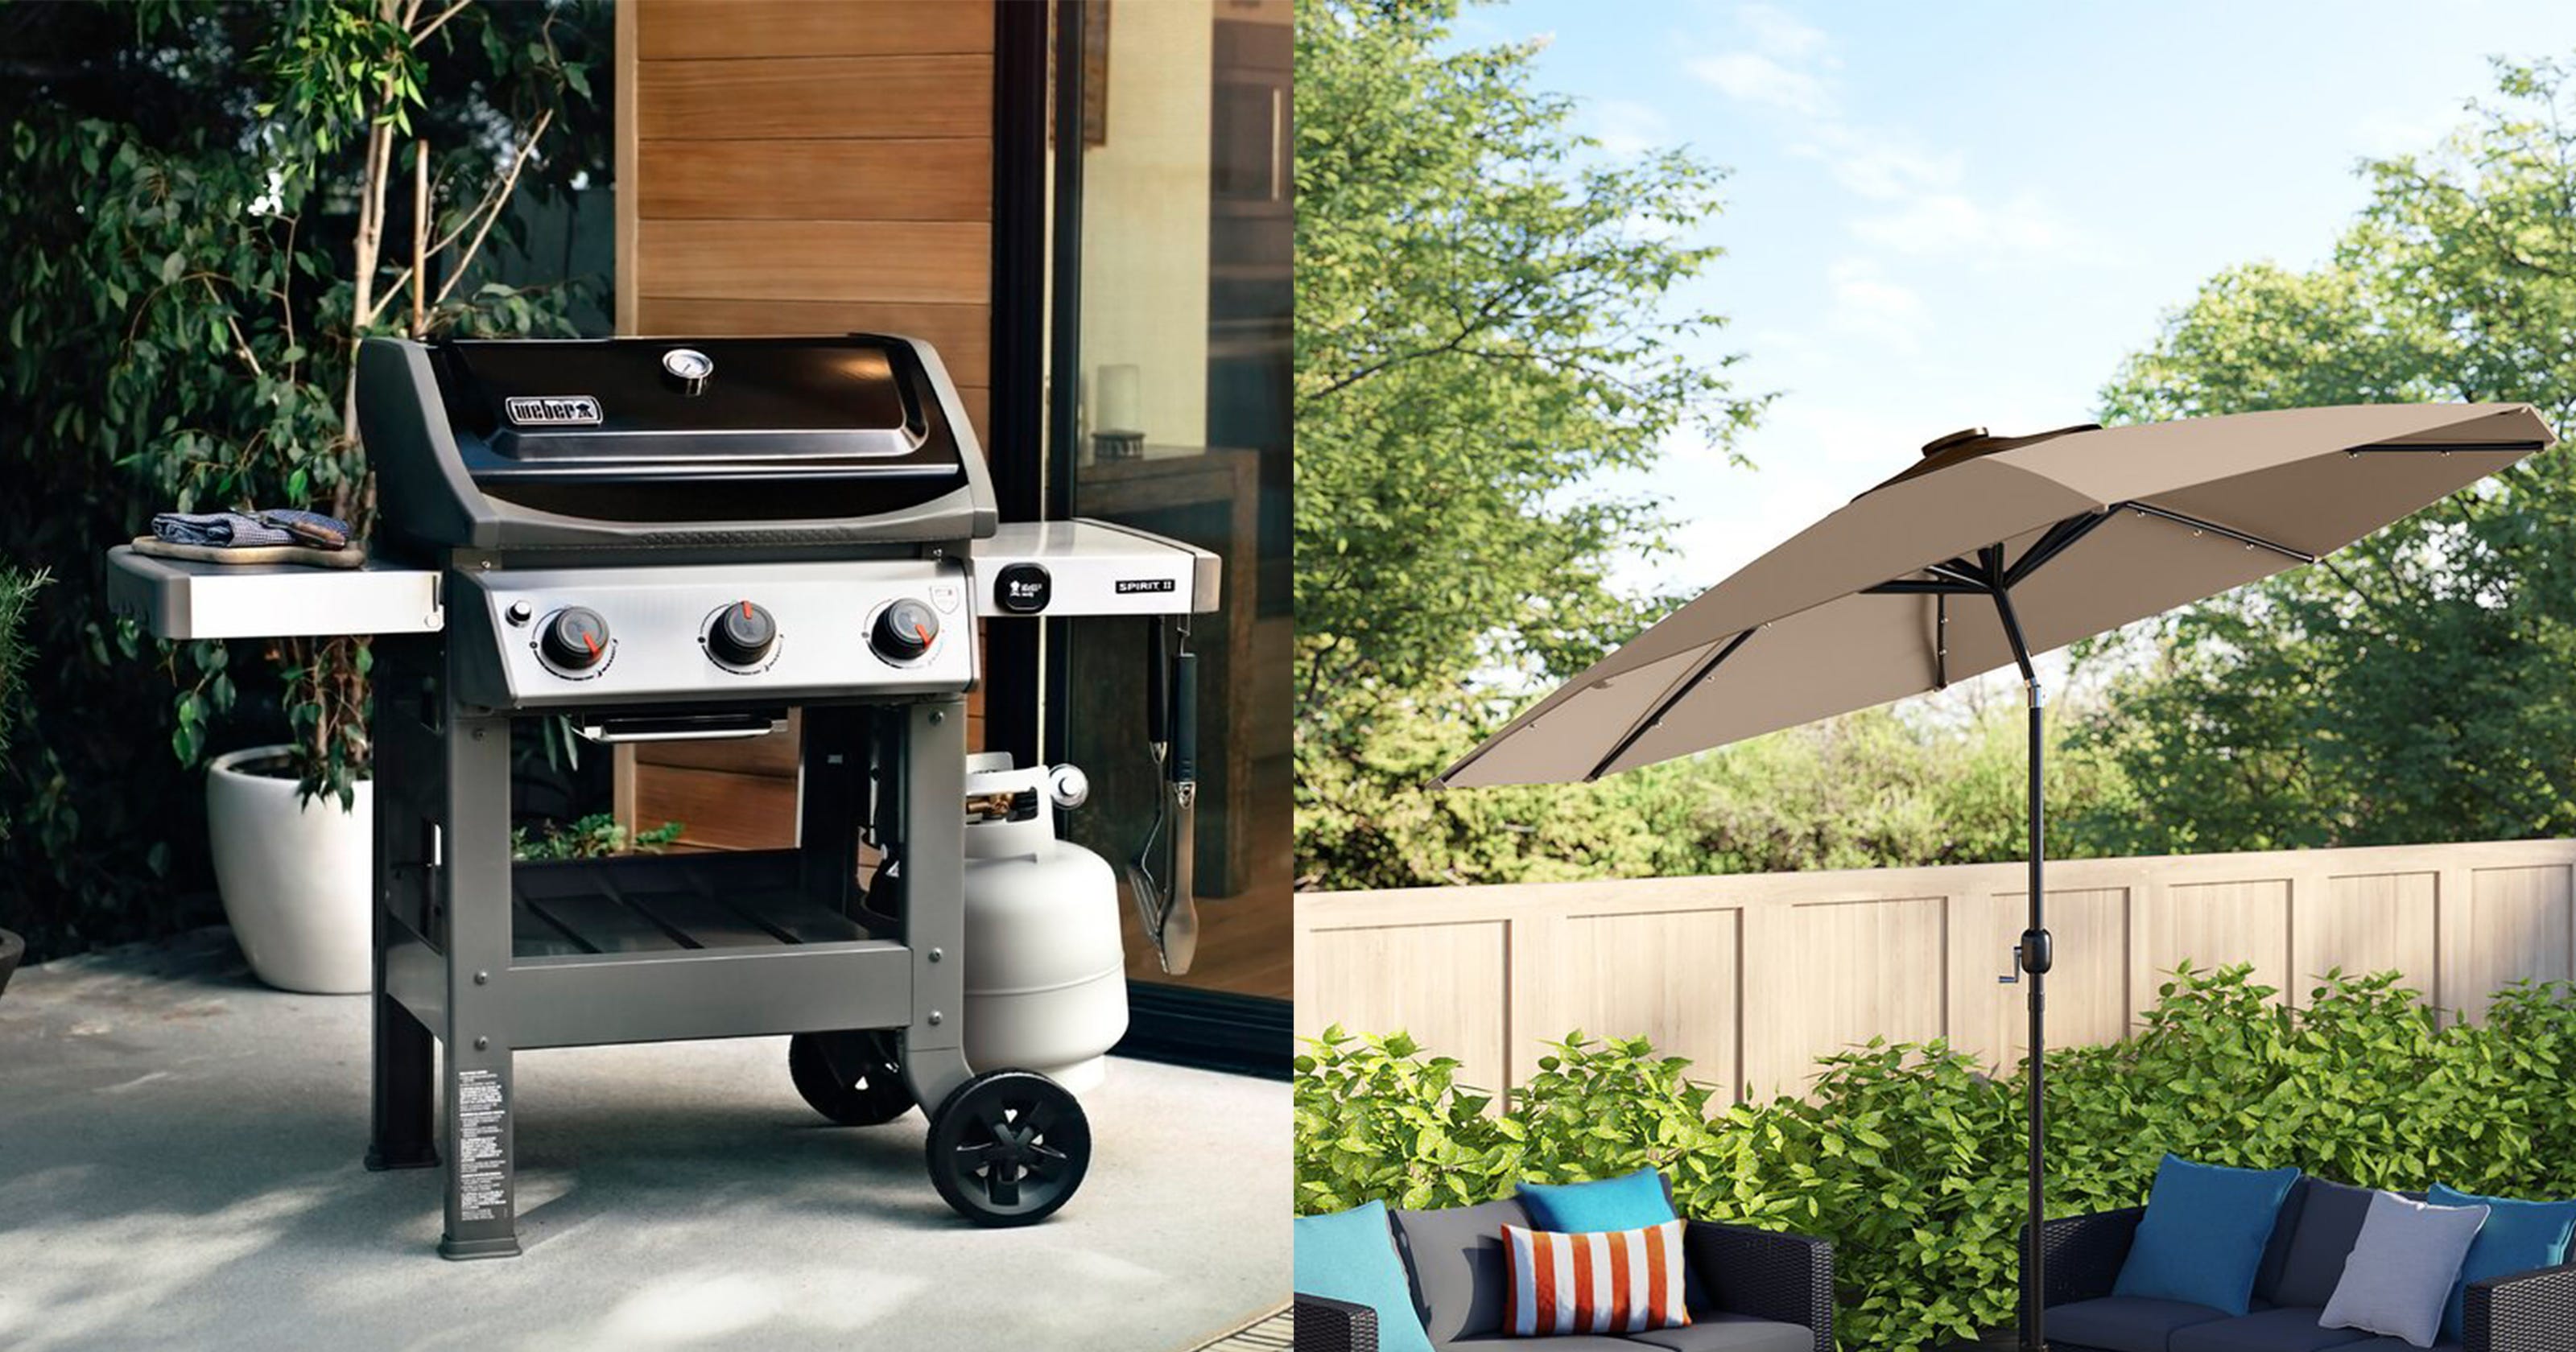 Wayfair outdoor furniture sale: Save on grills, fire pits ...